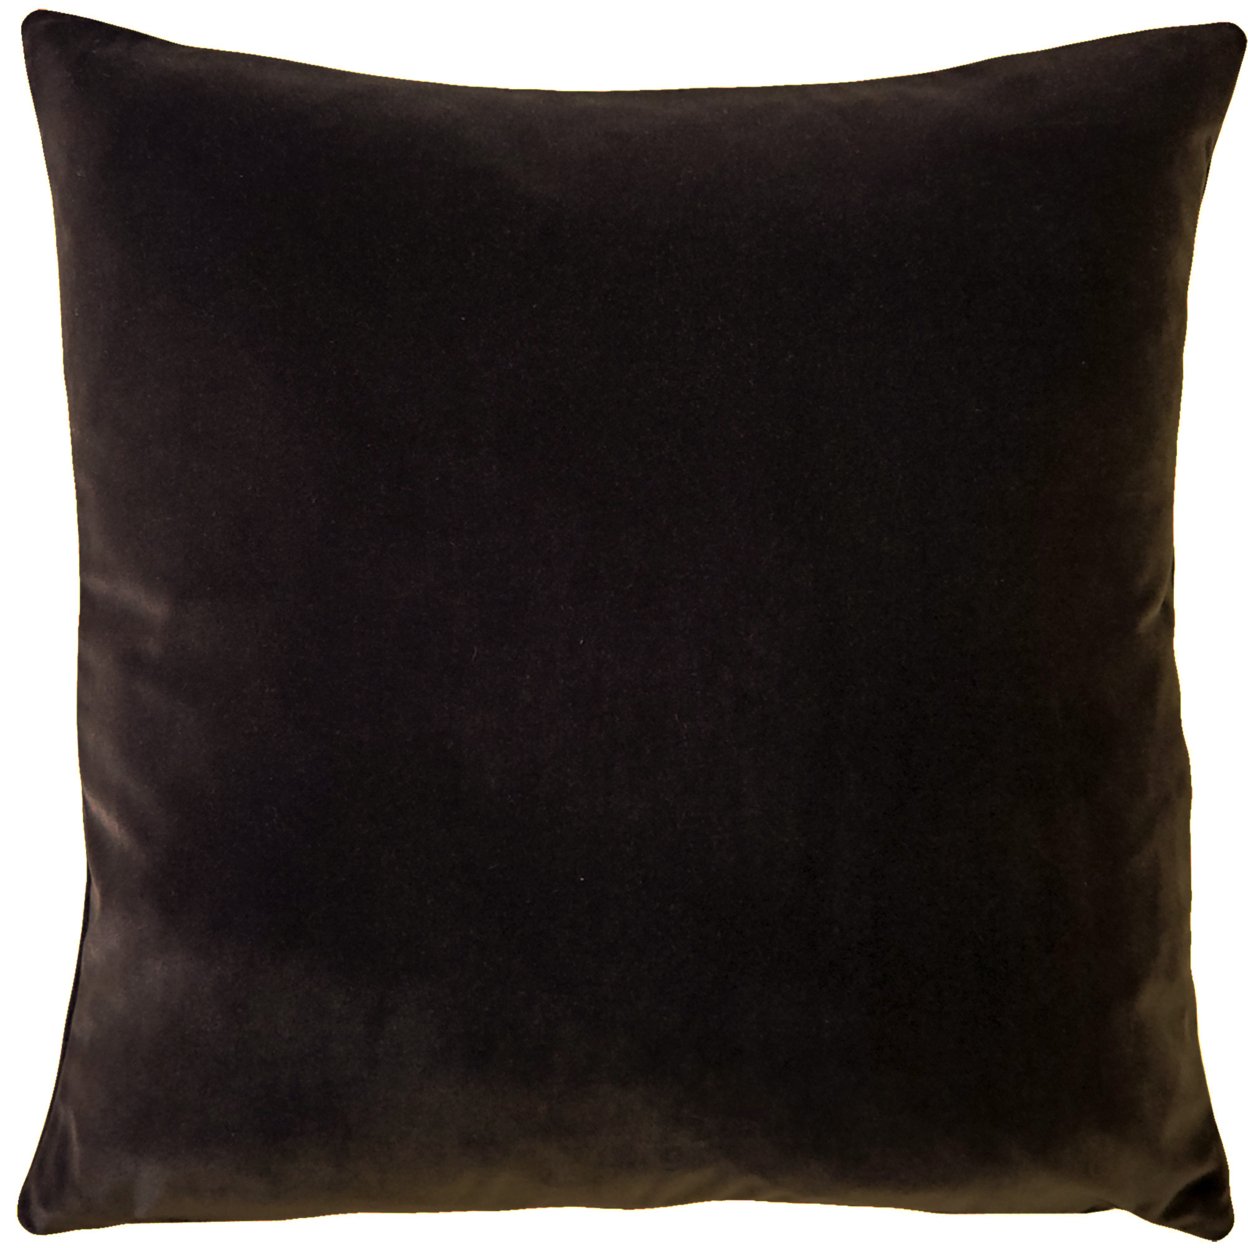 Castello Velvet Throw Pillows, Complete Pillow With Polyfill Pillow Insert (18 Colors, 3 Sizes) - Graphite Gray, 17x17